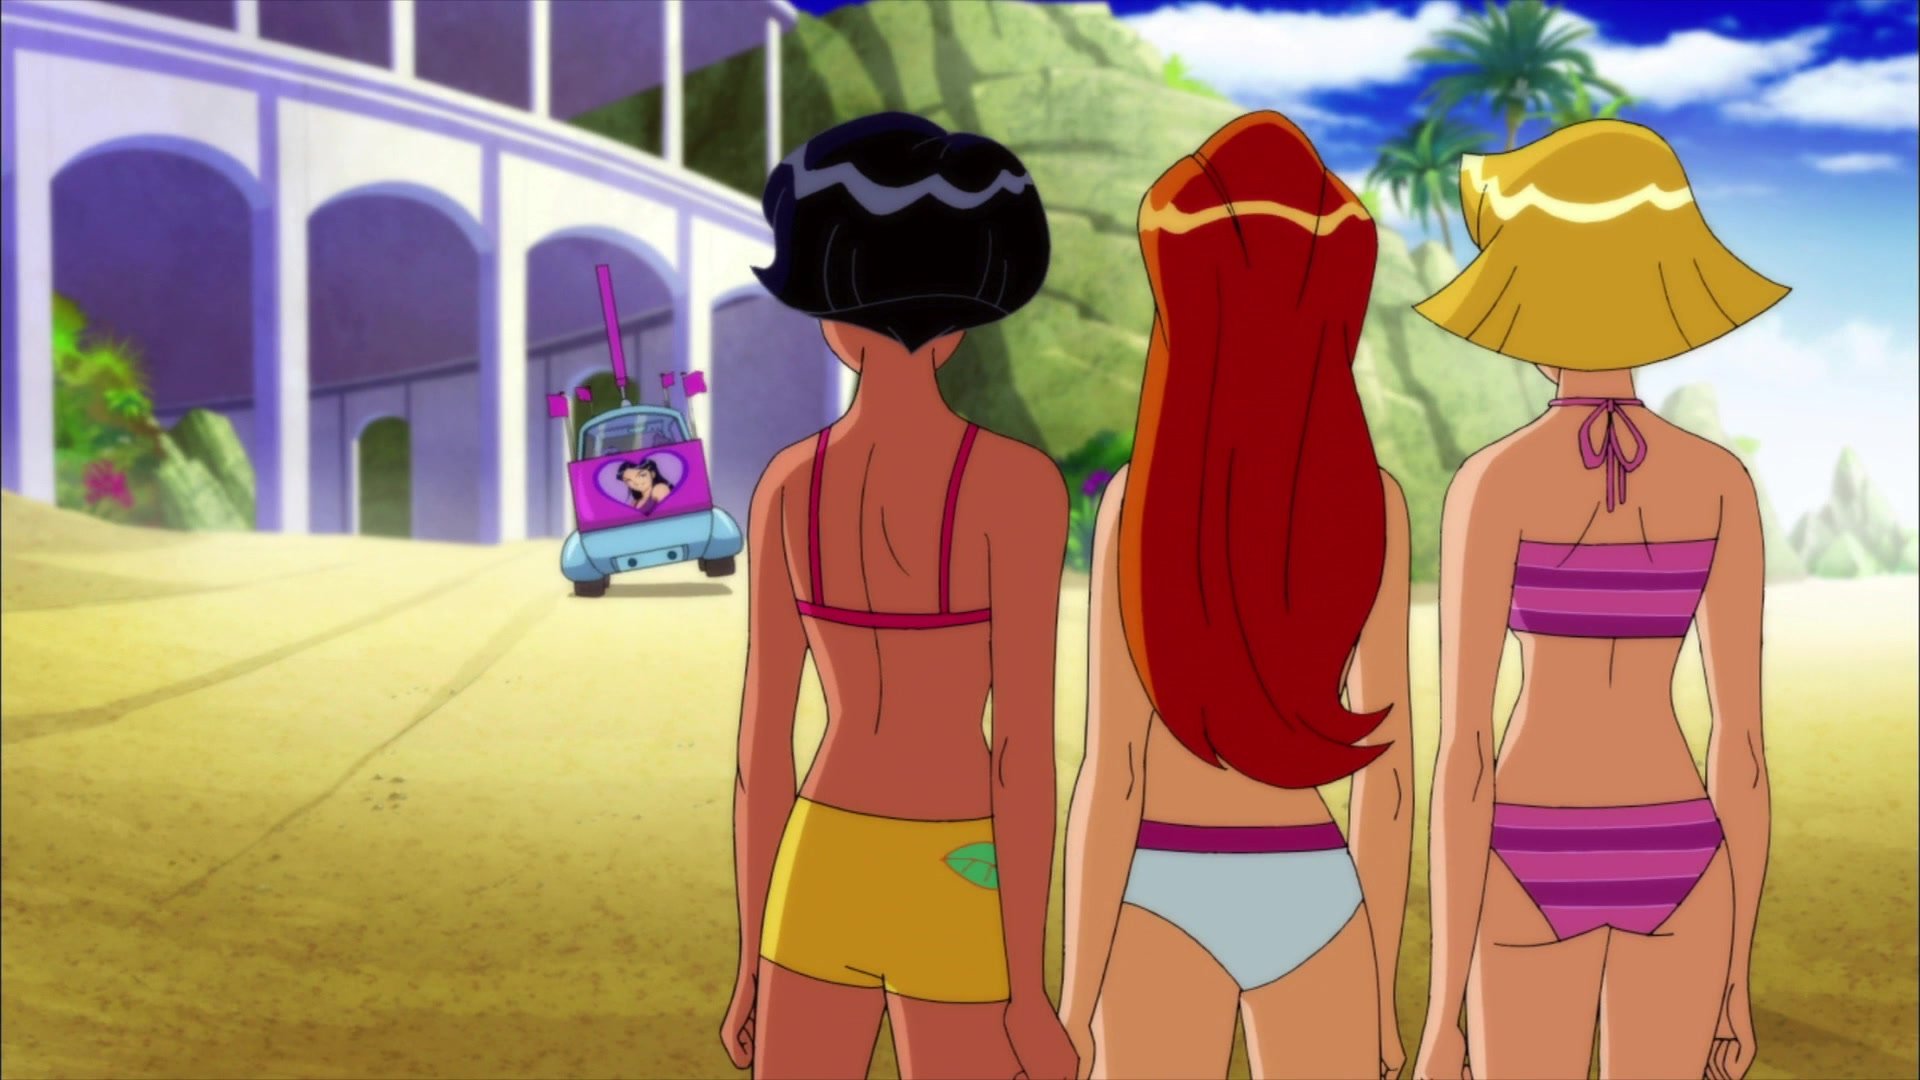 brian ferrante recommends Totally Spies Beach